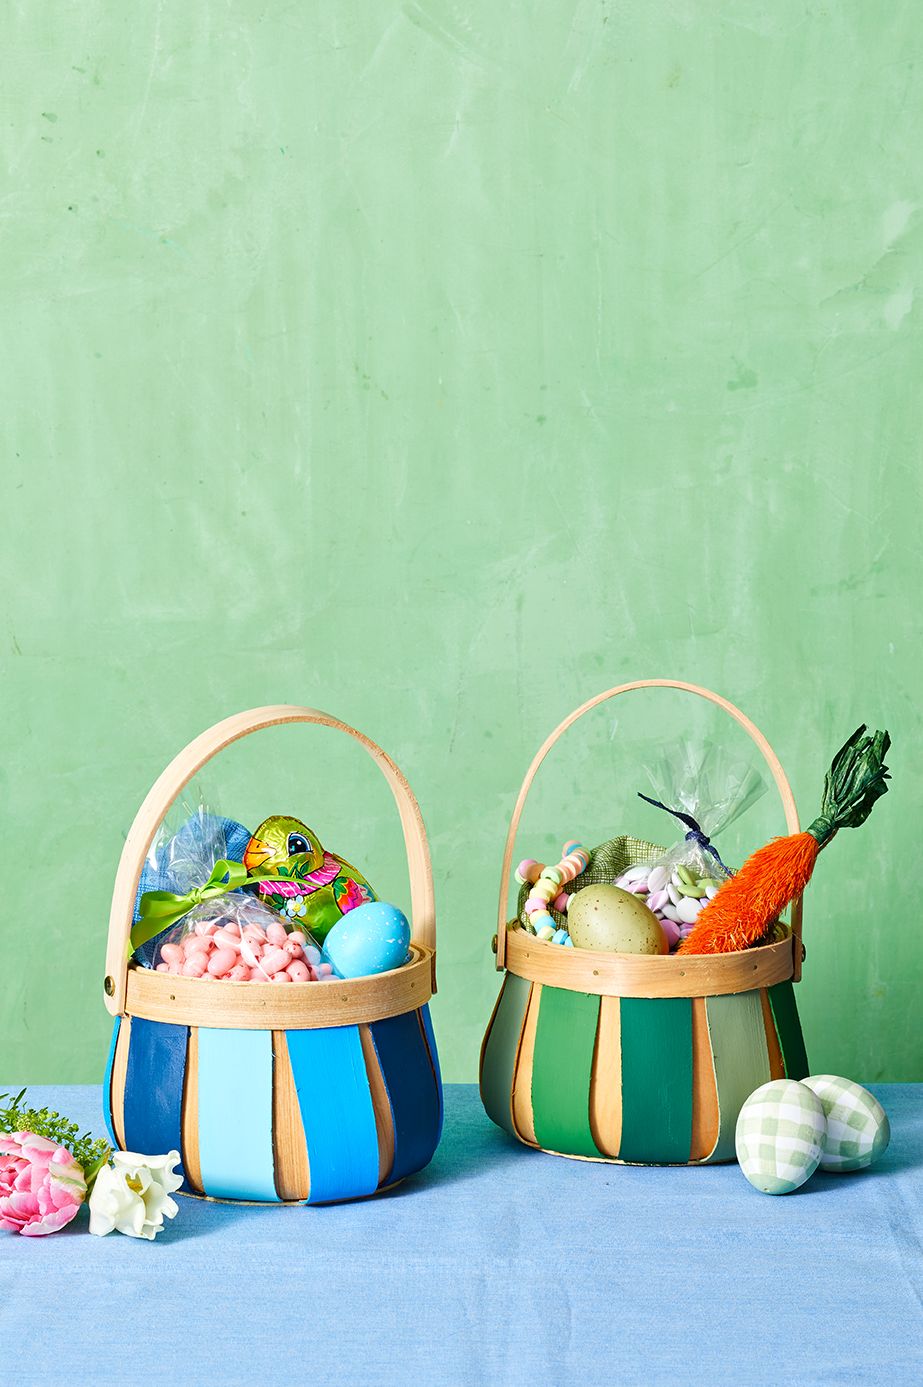 https://hips.hearstapps.com/hmg-prod/images/easter-basket-ideas-painted-basket-1677427141.jpg?crop=0.859xw:0.860xh;0.0867xw,0.112xh&resize=980:*